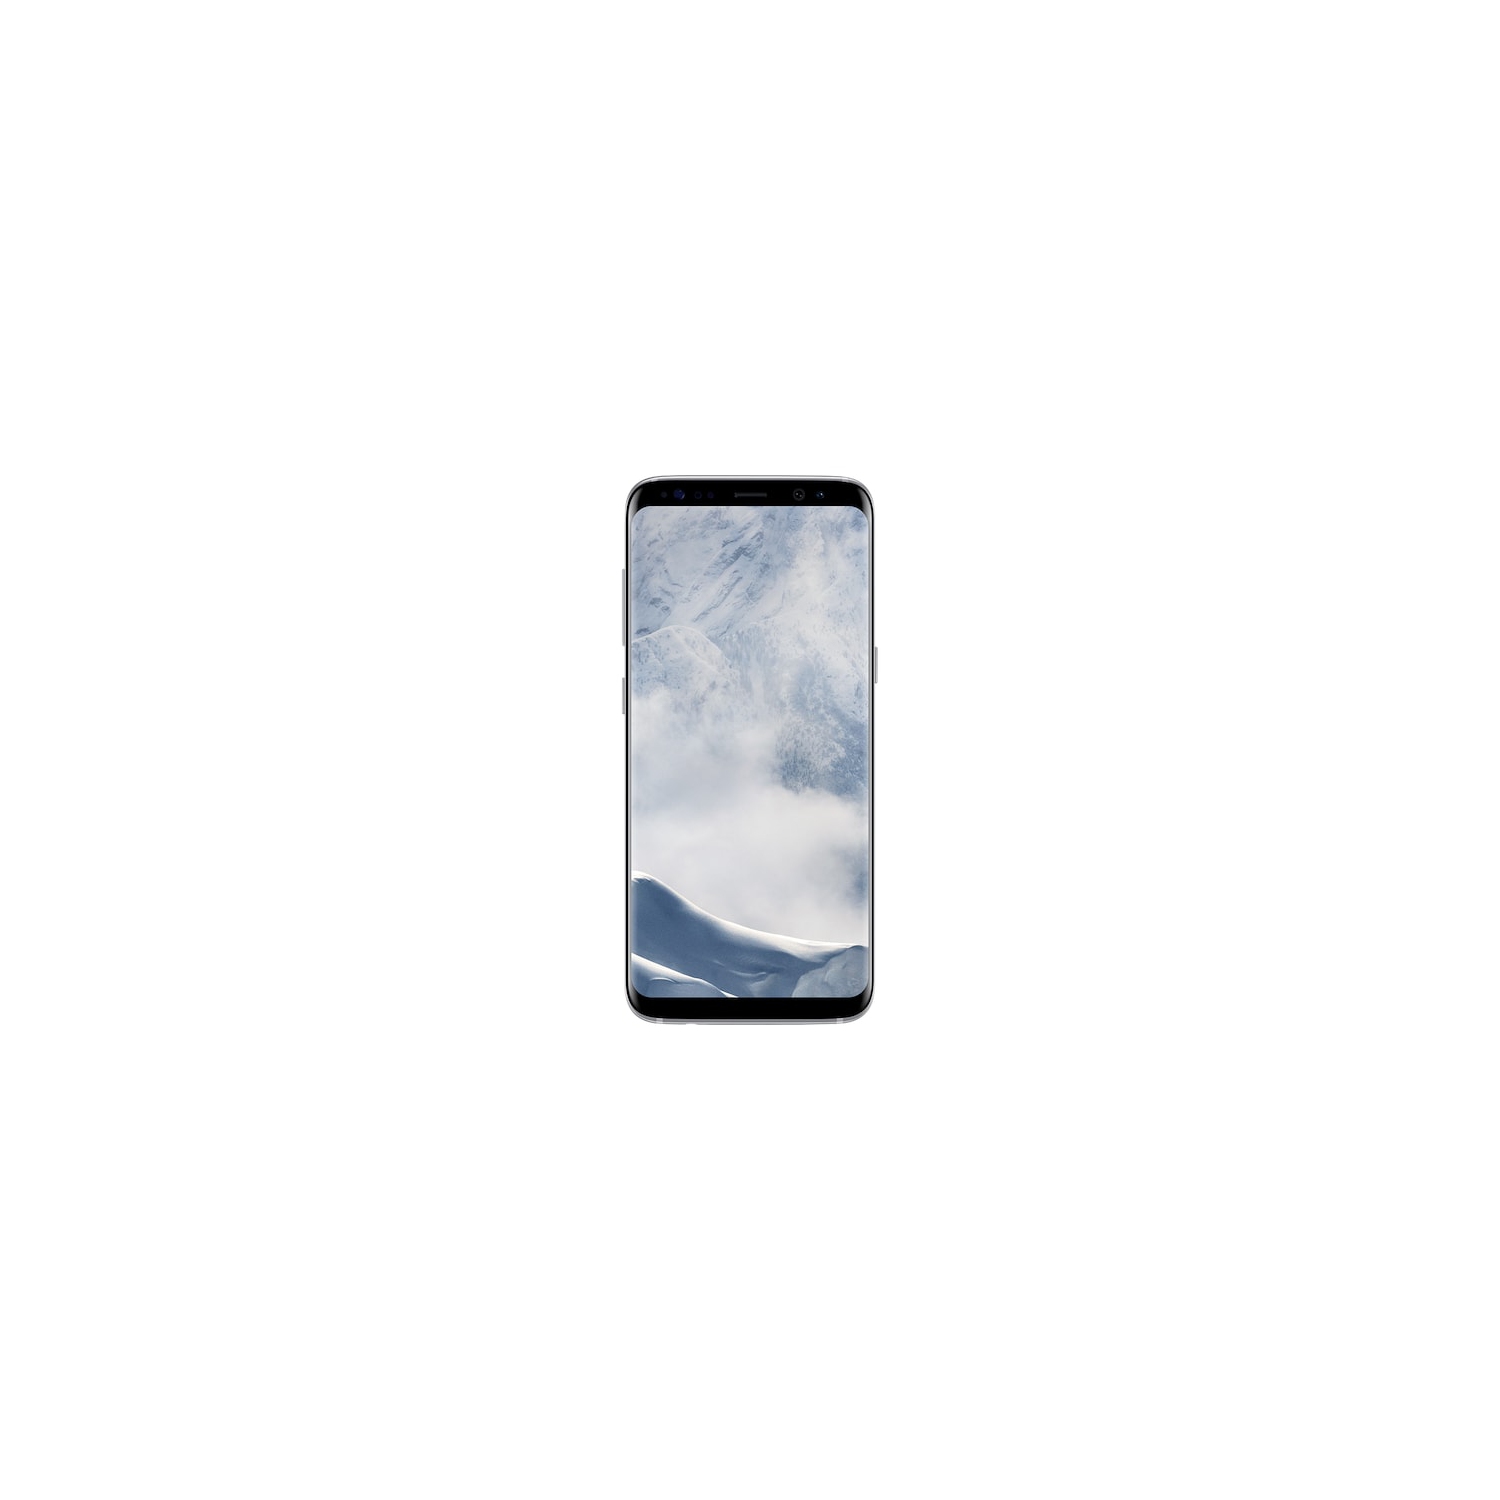 Refurbished (Excellent) - Samsung Galaxy S8 64GB Smartphone - Arctic Silver - Unlocked - Certified Refurbished